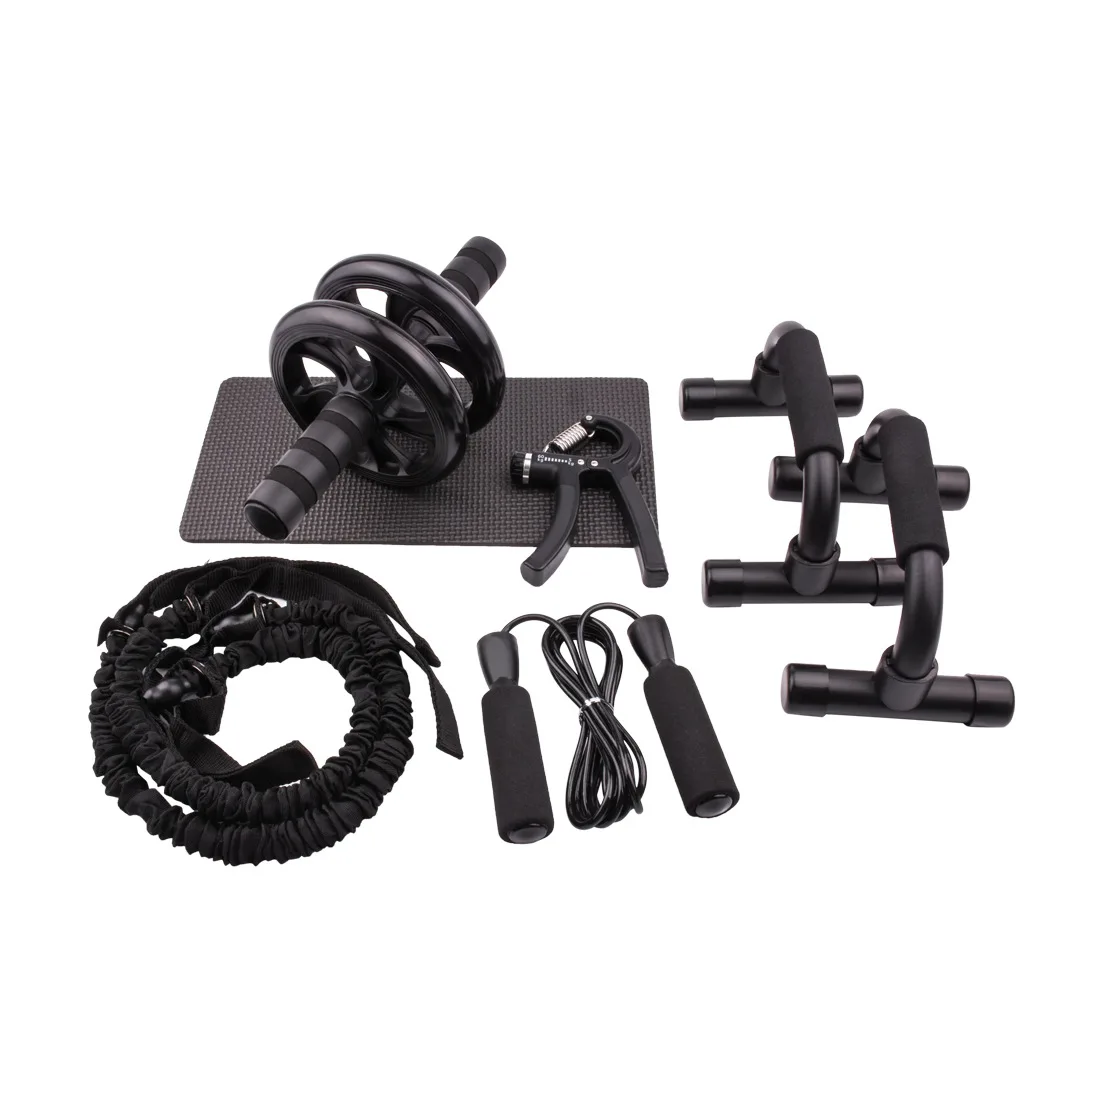 

6-in-1 abdominal wheel roller multifuntion kit Core Strength Home Workout sports machine Equipment Abdomen roller Muscles Train, Black